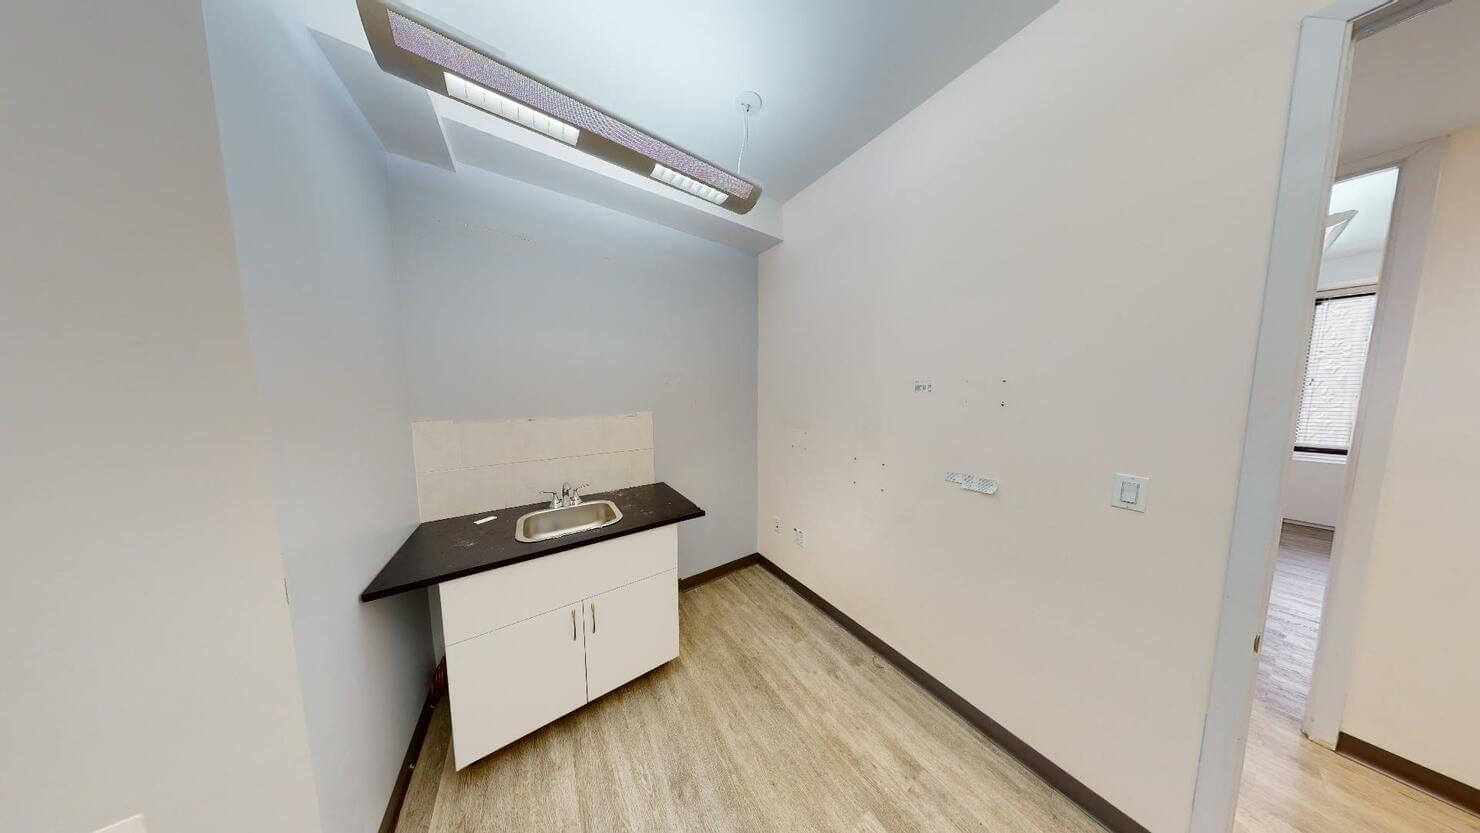 369 Lexington Avenue Office Space, #8A - Treatment Room with Sink